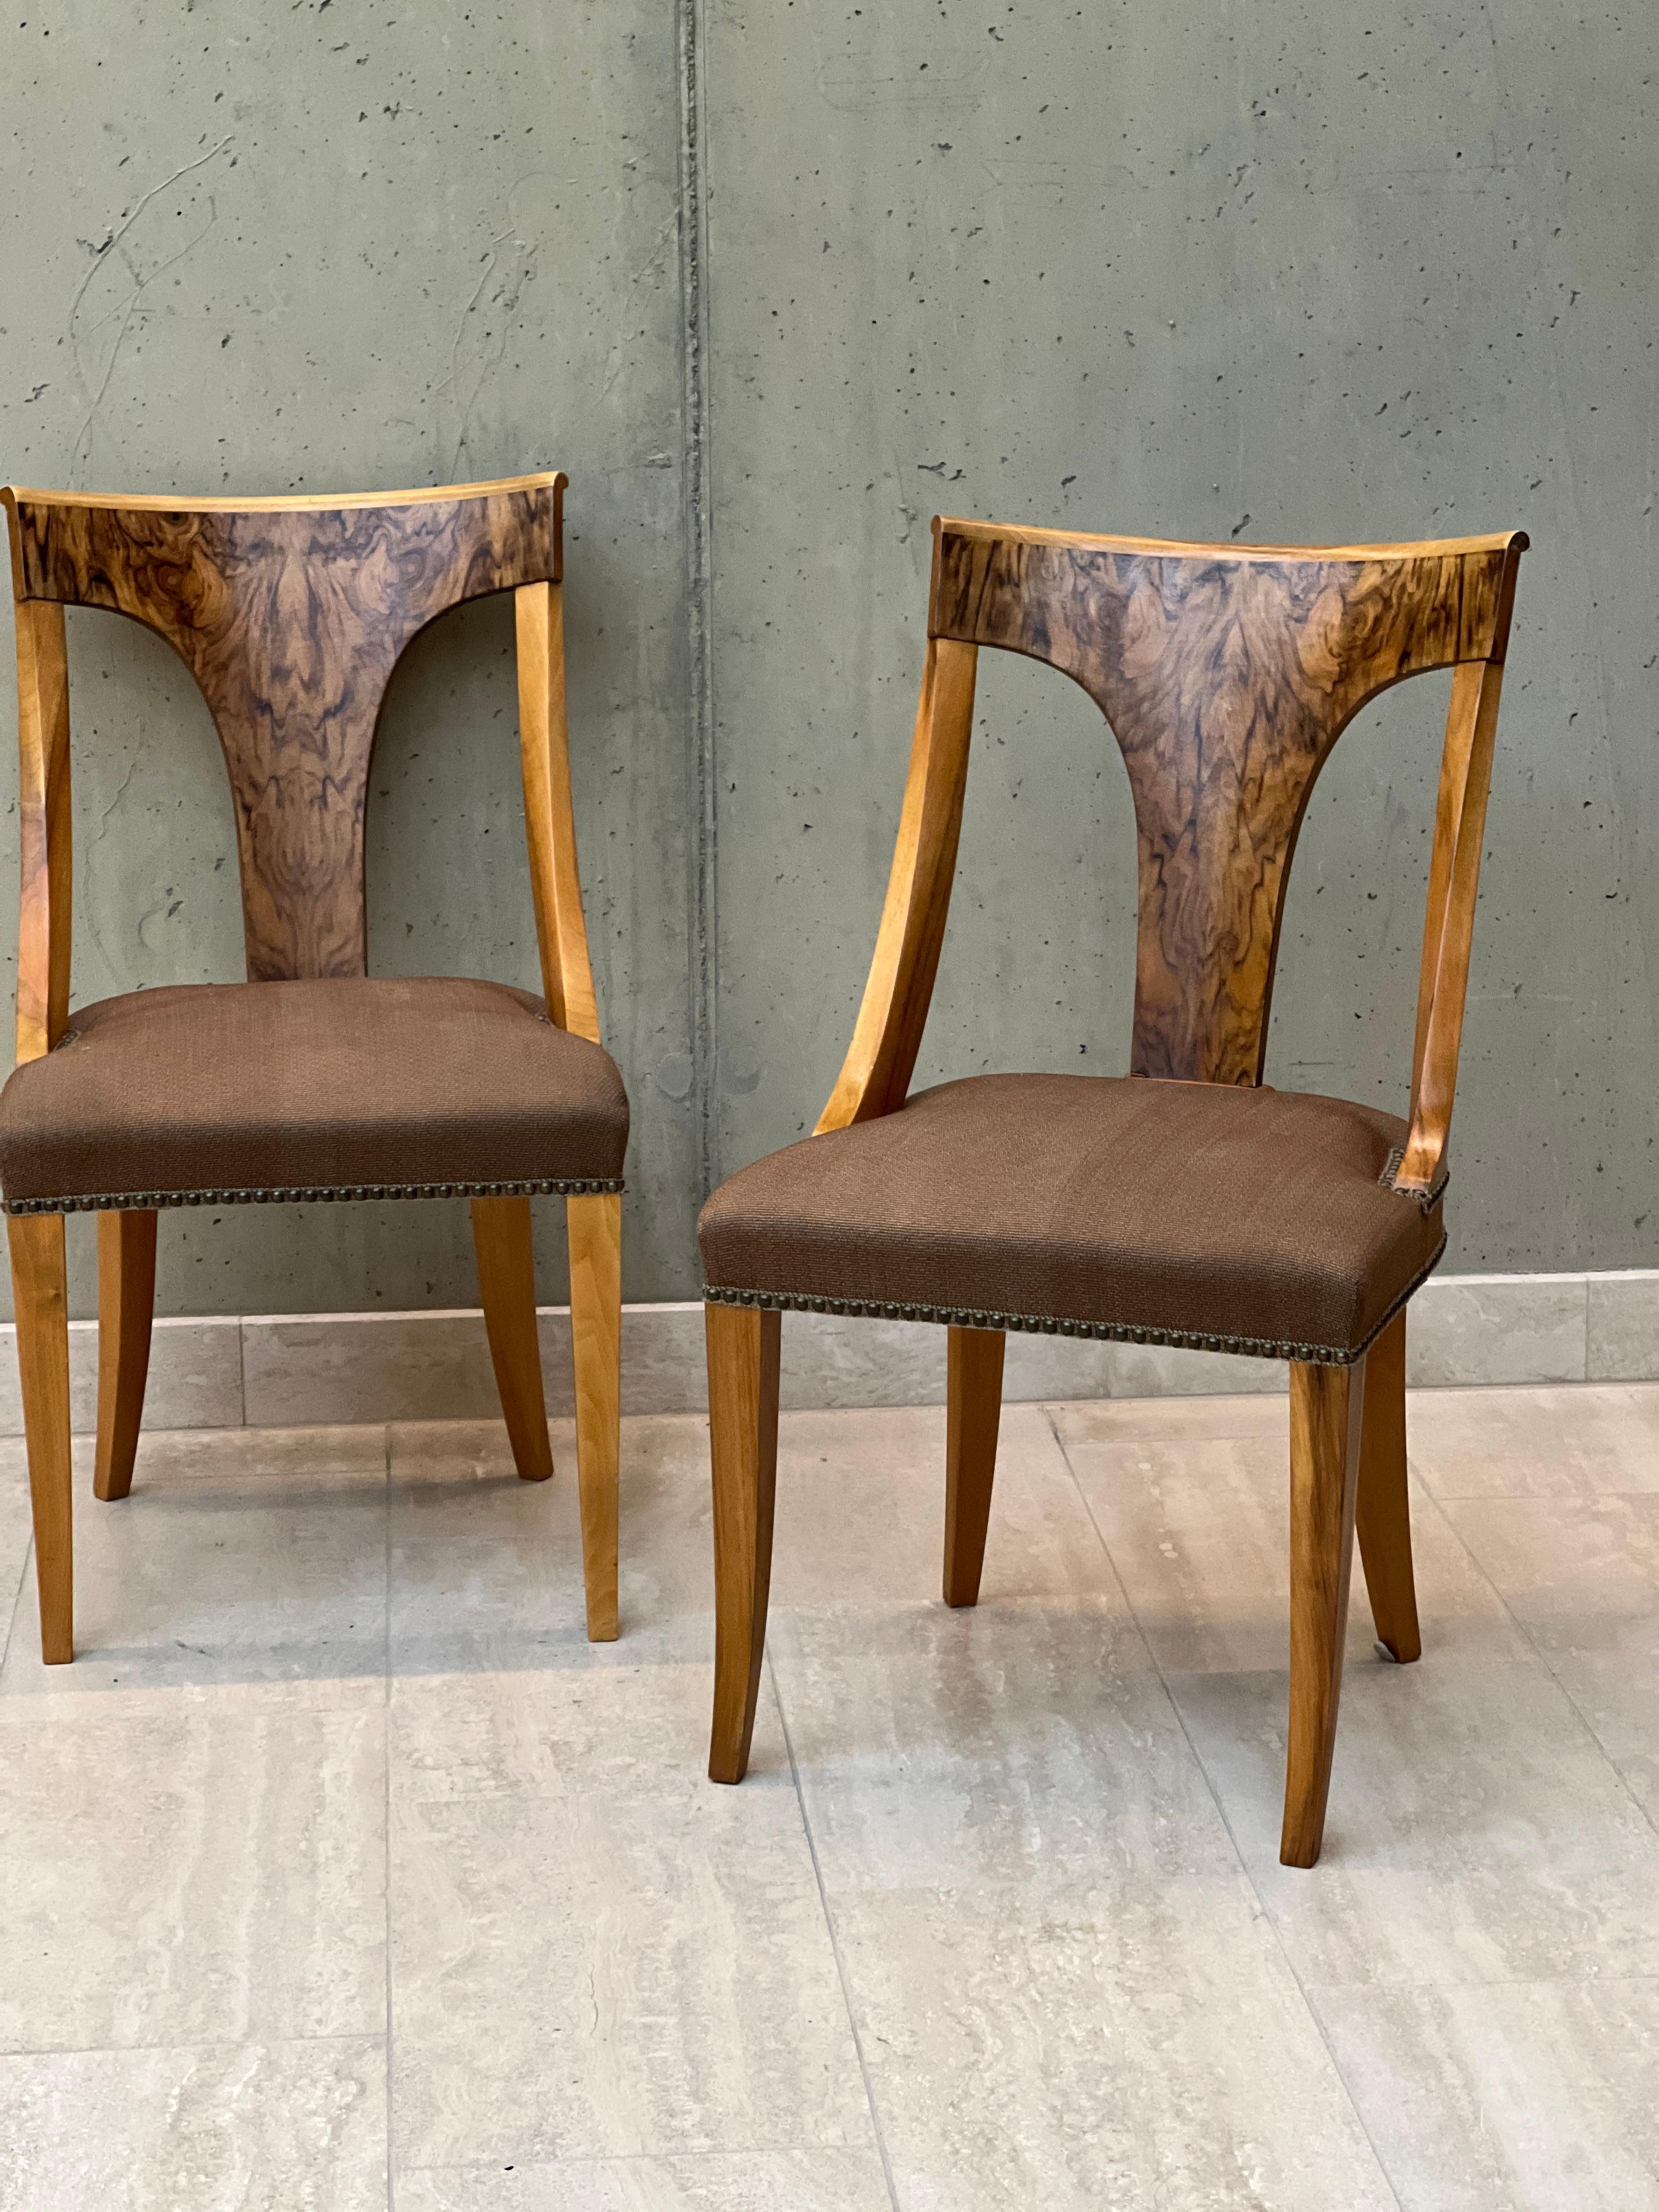 Exquisite Pair of French Empire Gondola-Style Chais: A Fusion of Elegance and Tradition

Immerse yourself in the opulent world of 19th-century furniture with our captivating pair of Empire chairs. Crafted from the finest walnut wood and fabric